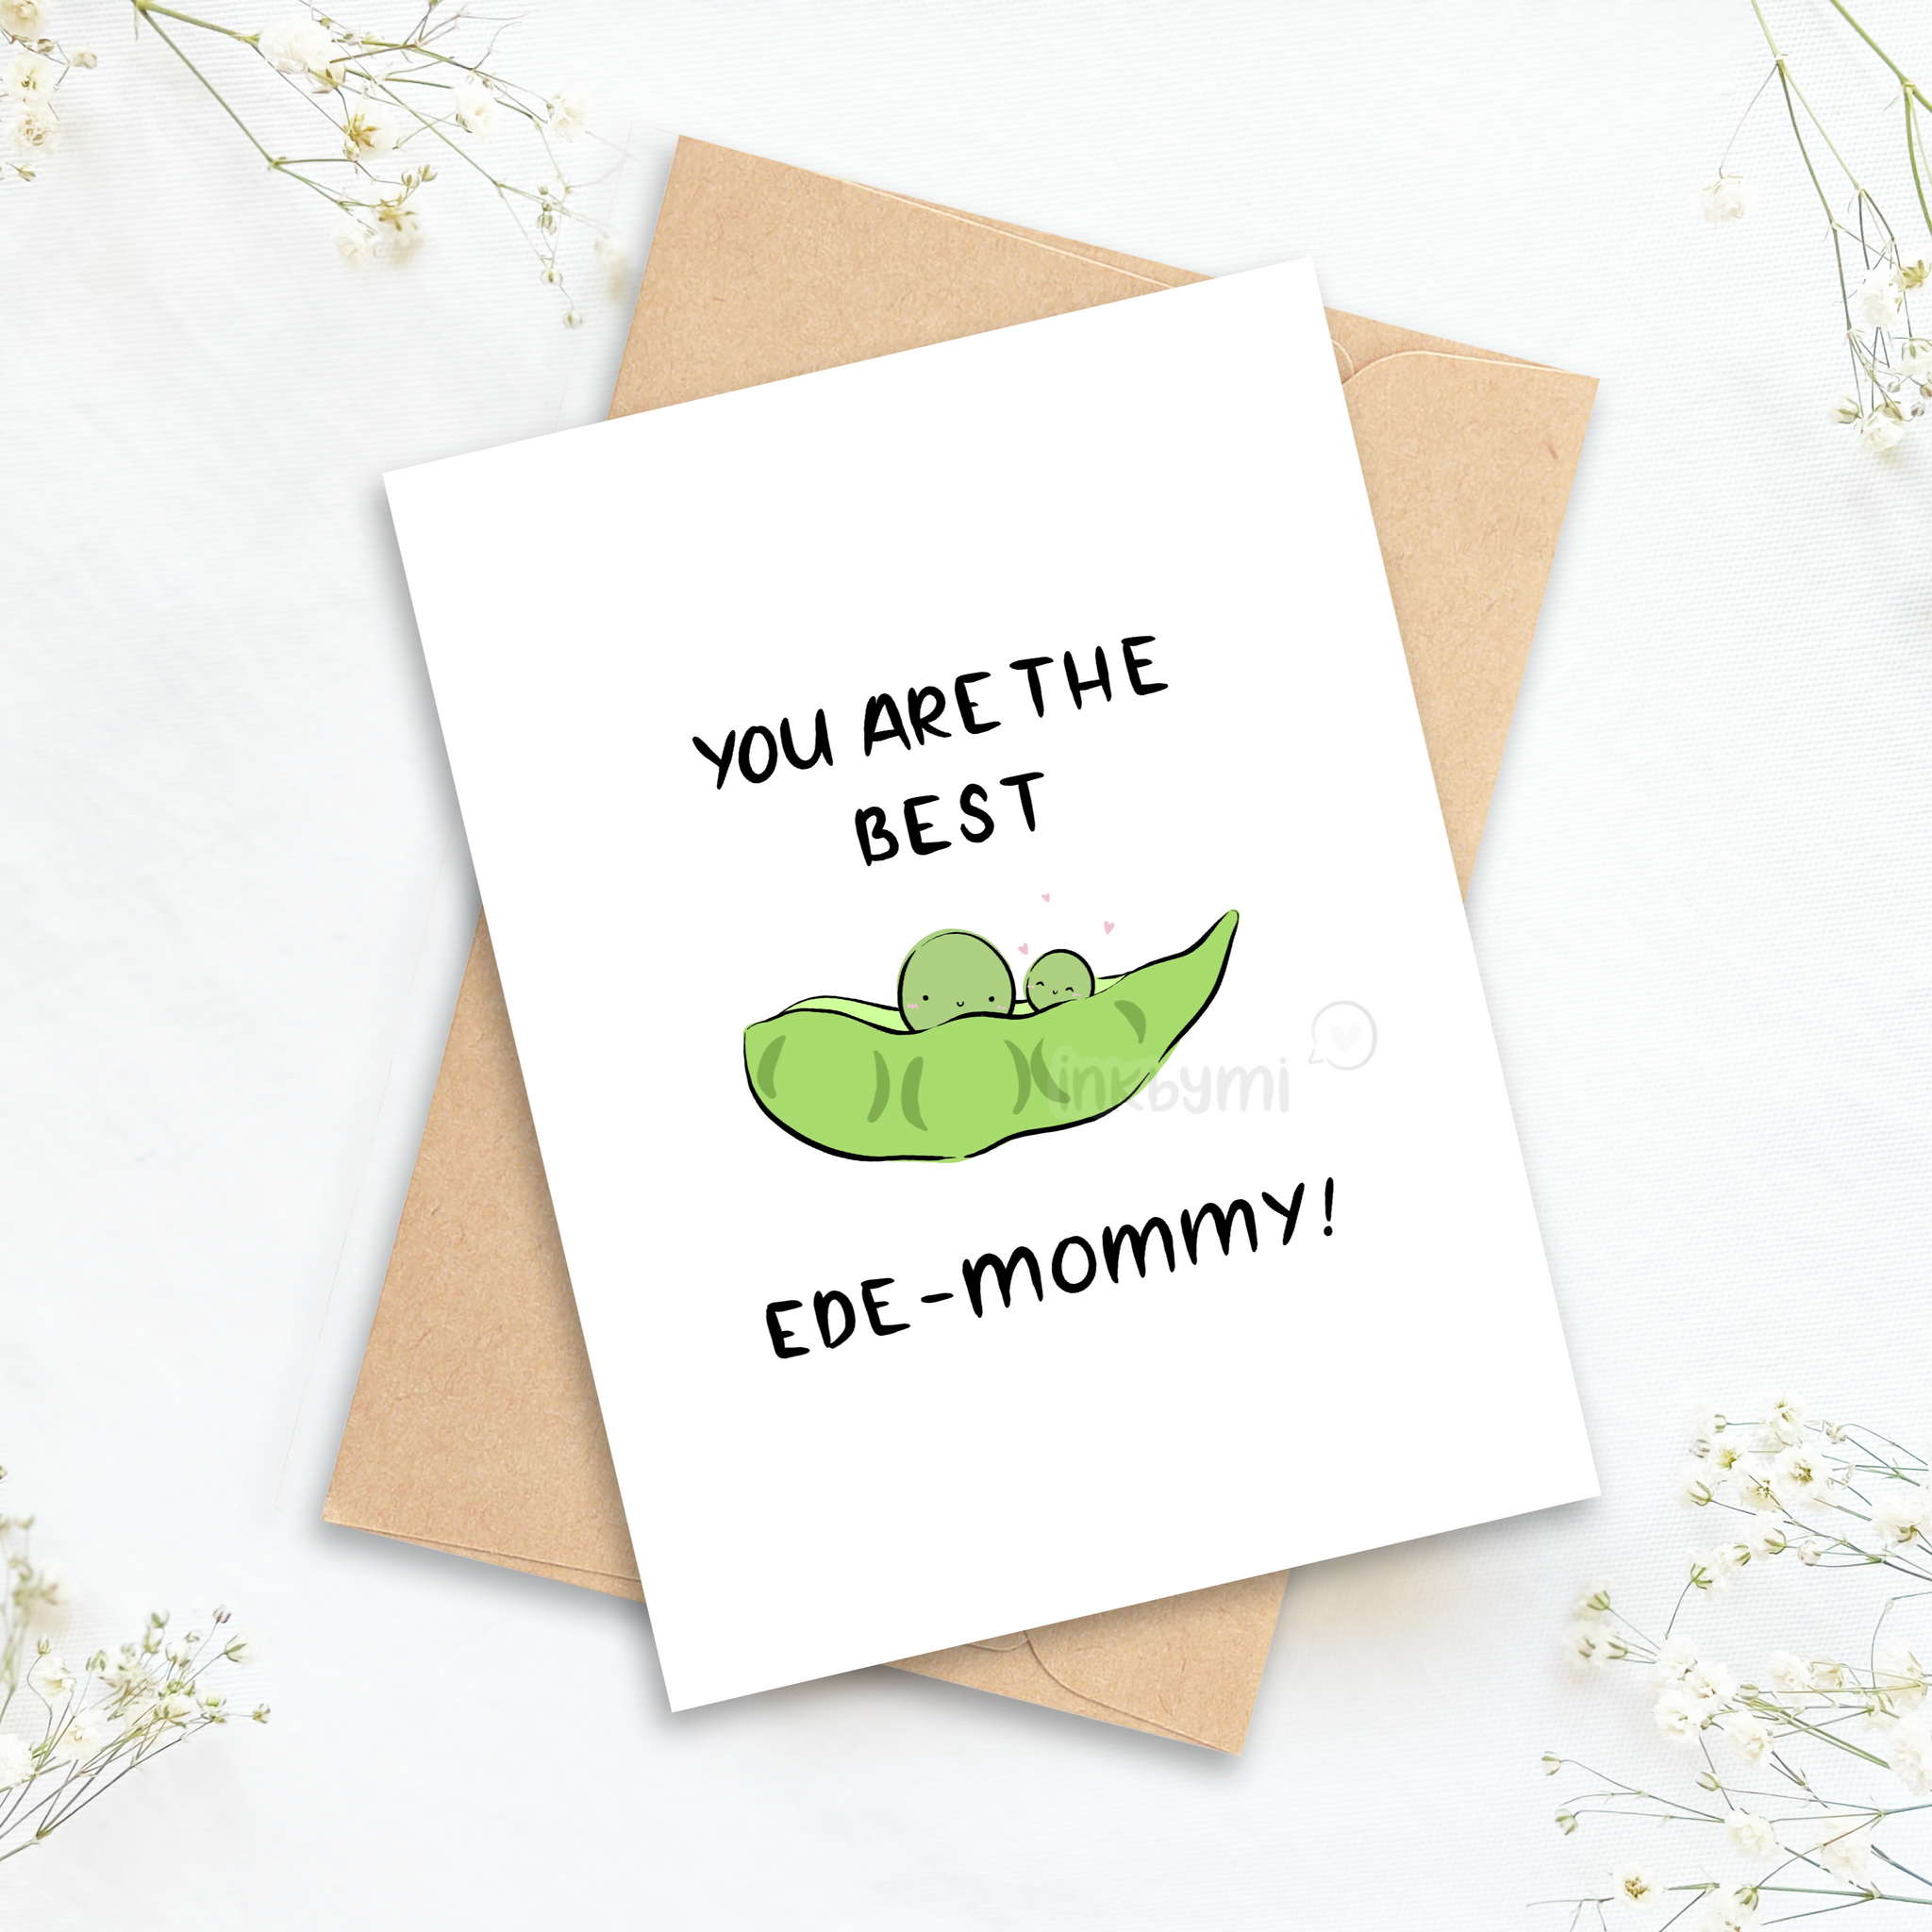 You're the Best Ede-Mommy!